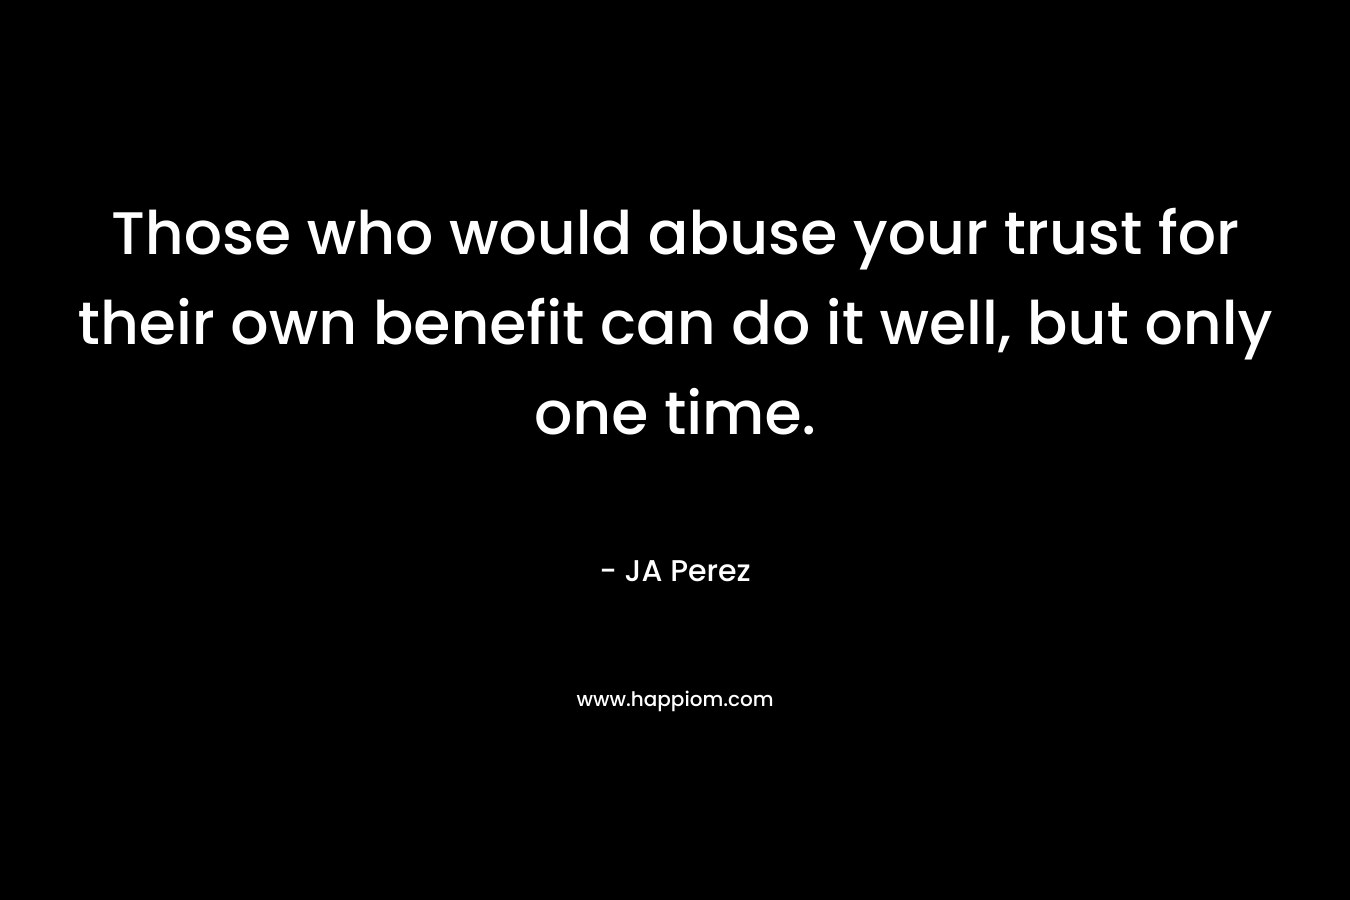 Those who would abuse your trust for their own benefit can do it well, but only one time.